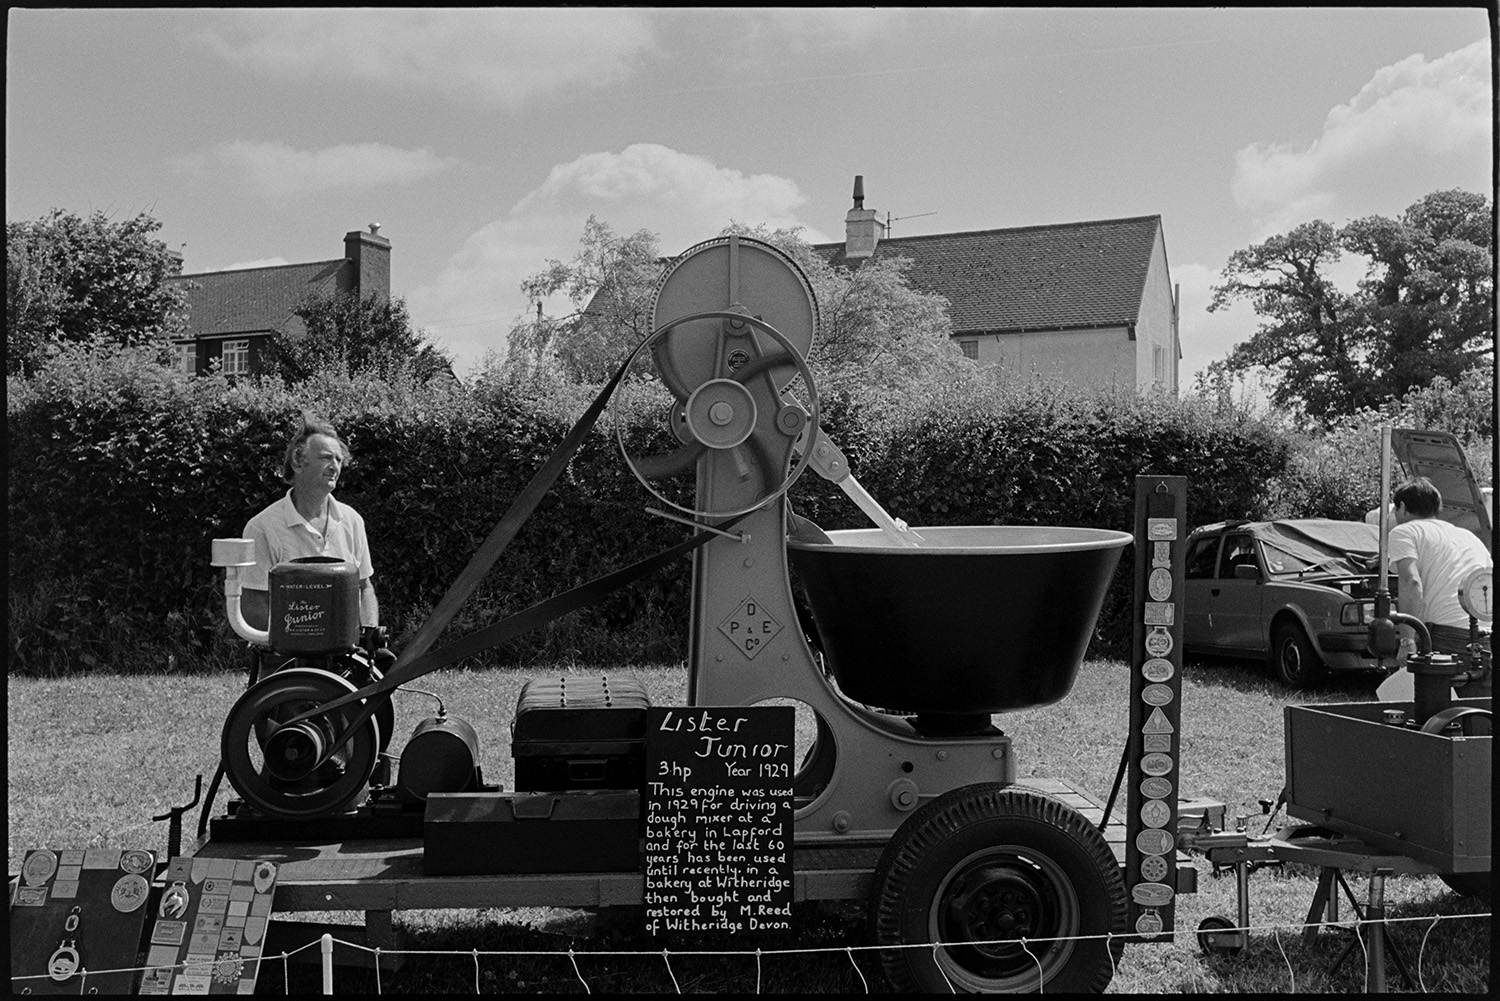 Country fair, vintage cars, sheep being rounded up for show.
[A Lister Junior diesel engine on display in a field at Ashreigney Country Fair. Behind it is a tall hedge, trees and village houses.]